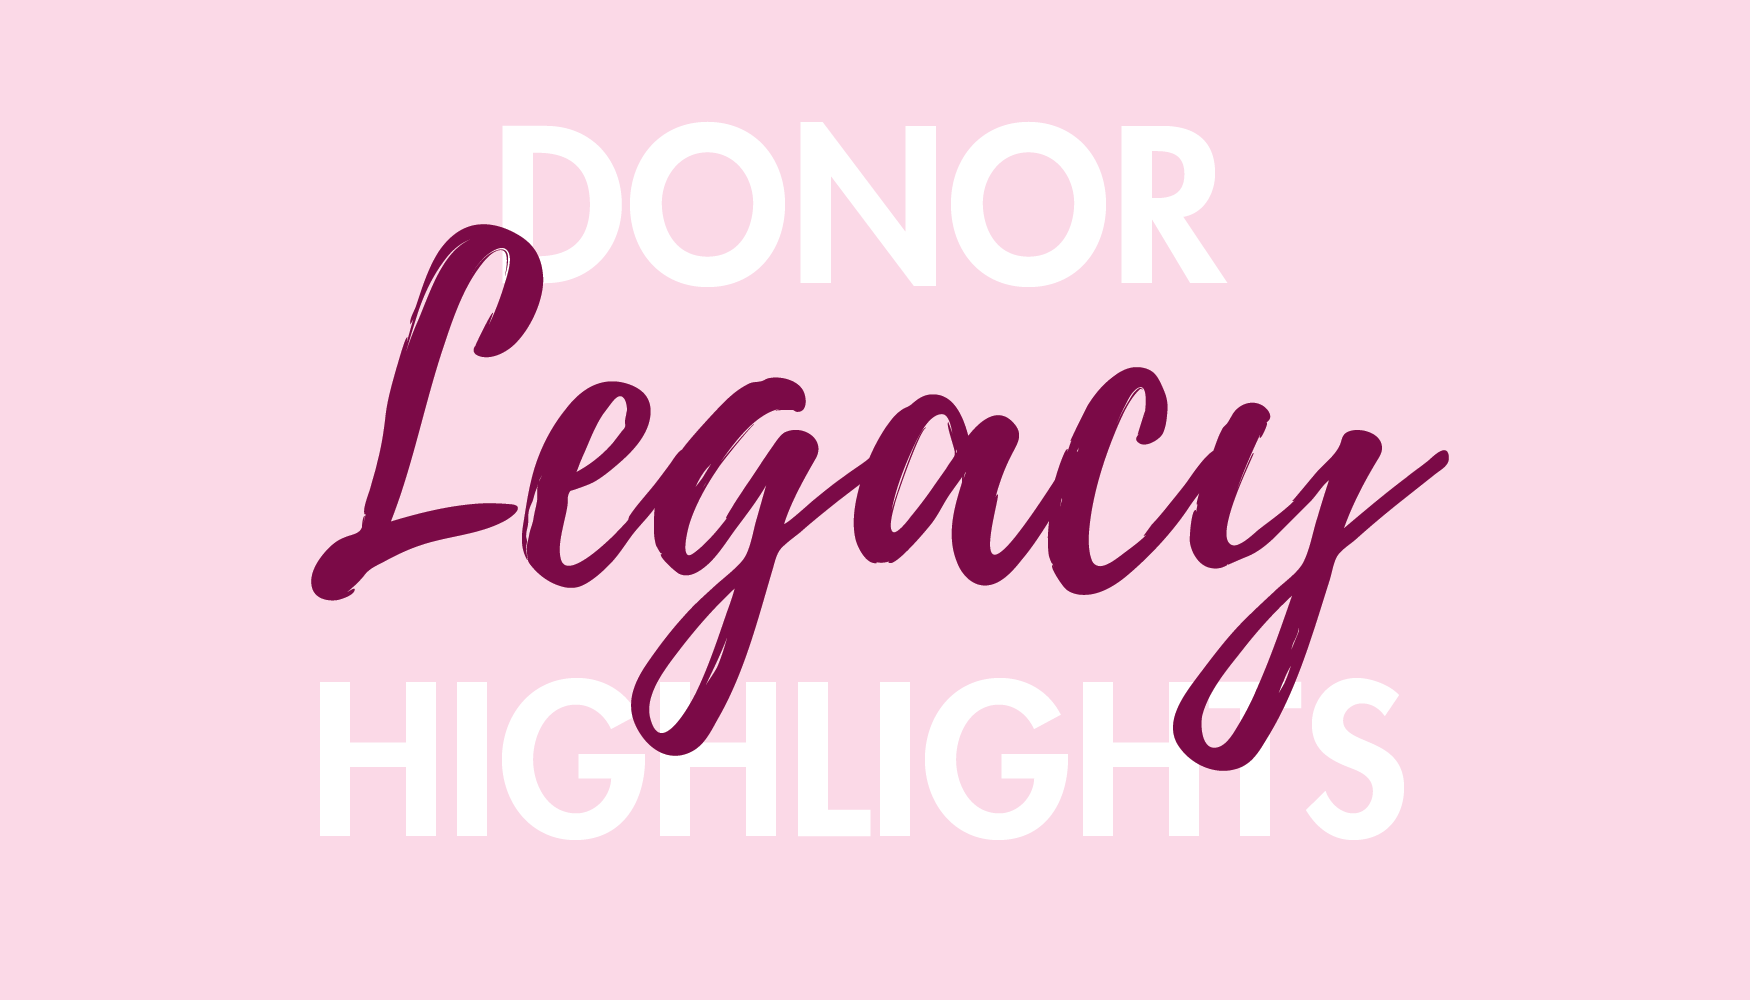 Donor Legacy Highlights